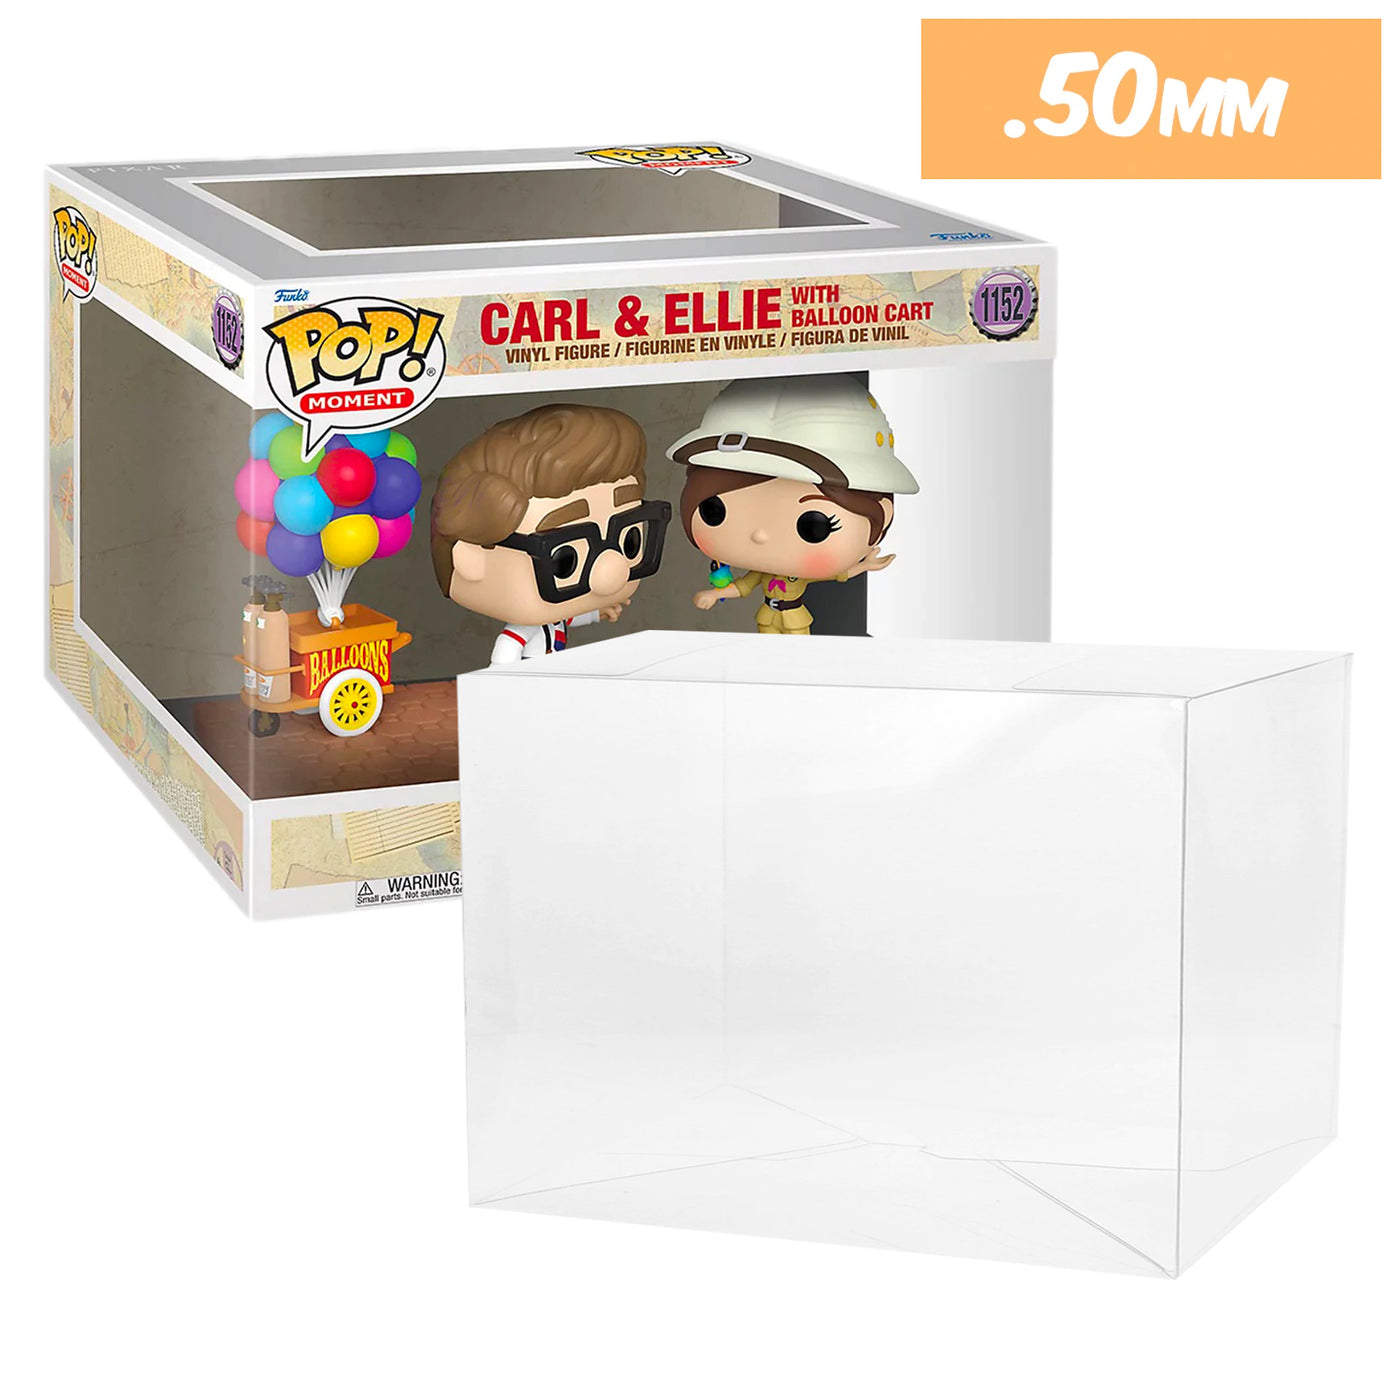 Funko Pop! Up - Carl & Ellie with Balloon Cart Movie Moments #1152 - 2